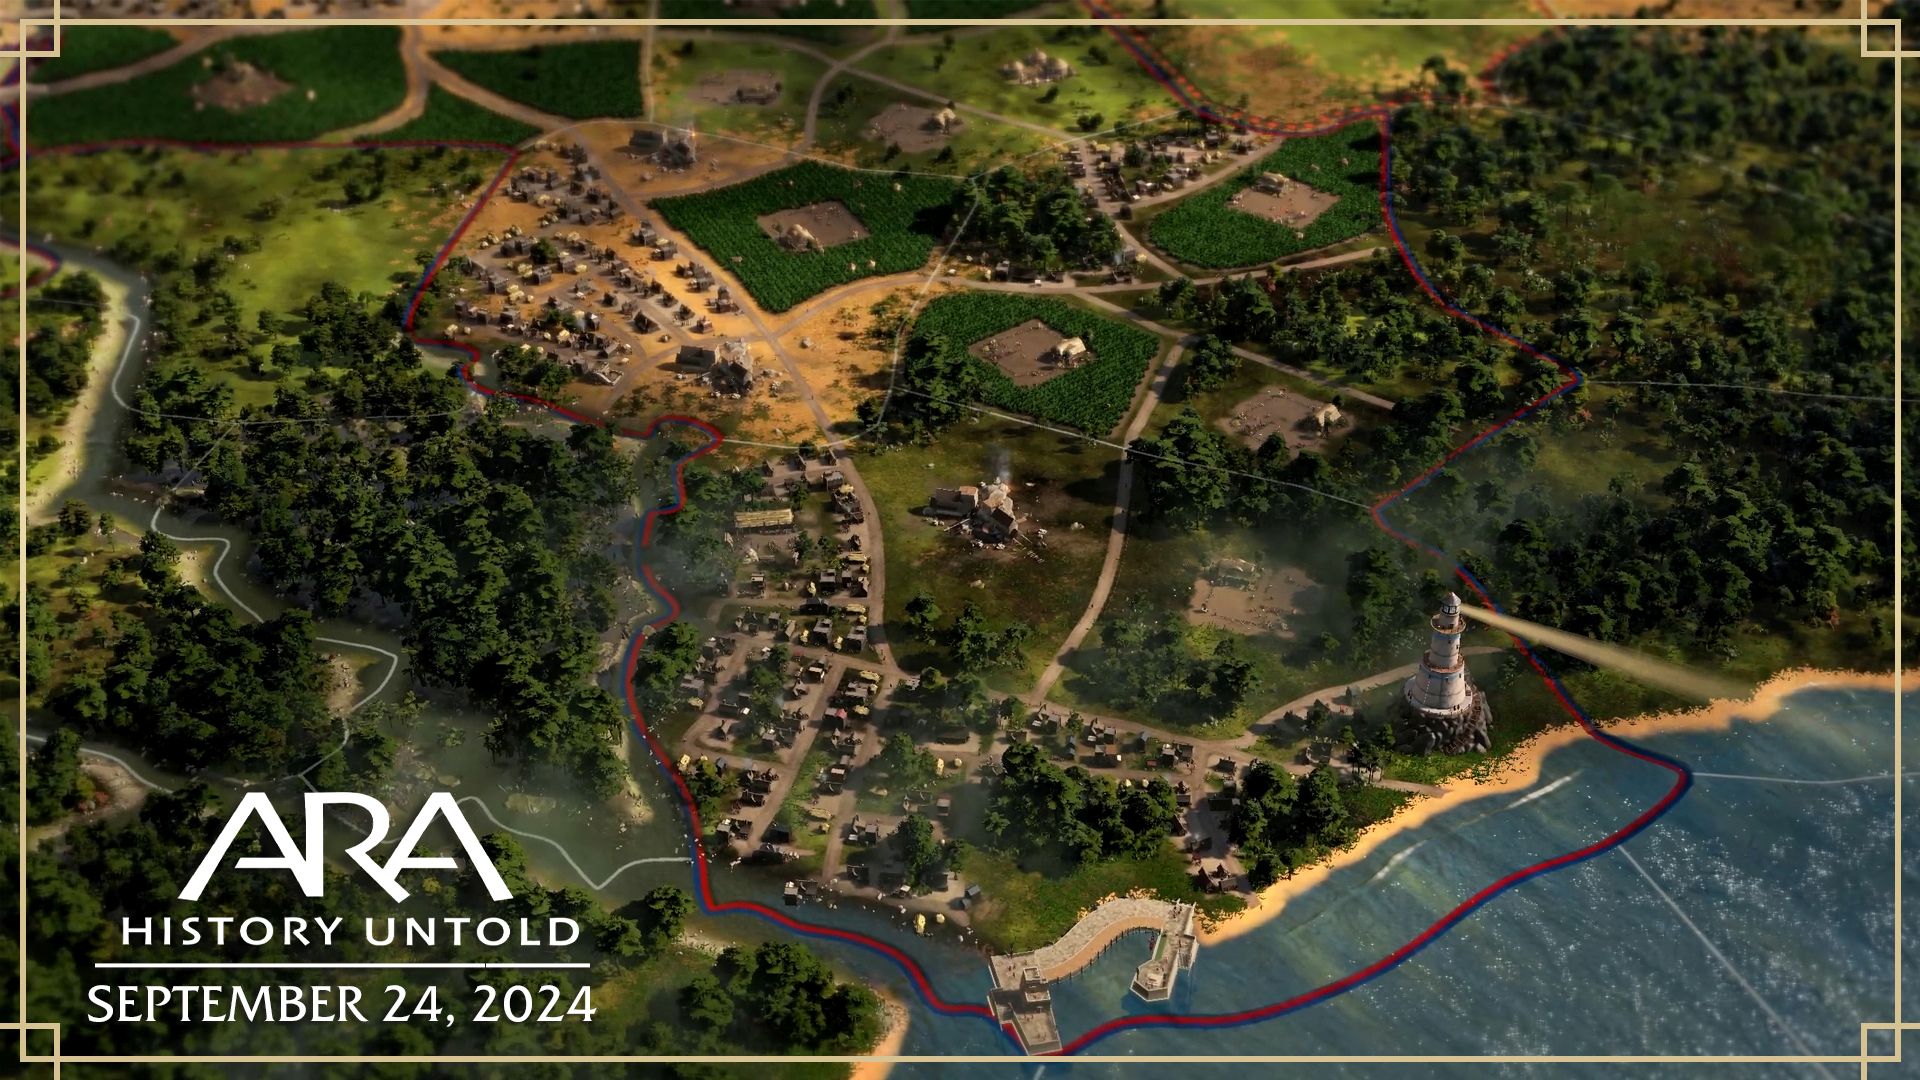 Ara: History Untold Announces Release Date, Multiplayer Details, and More